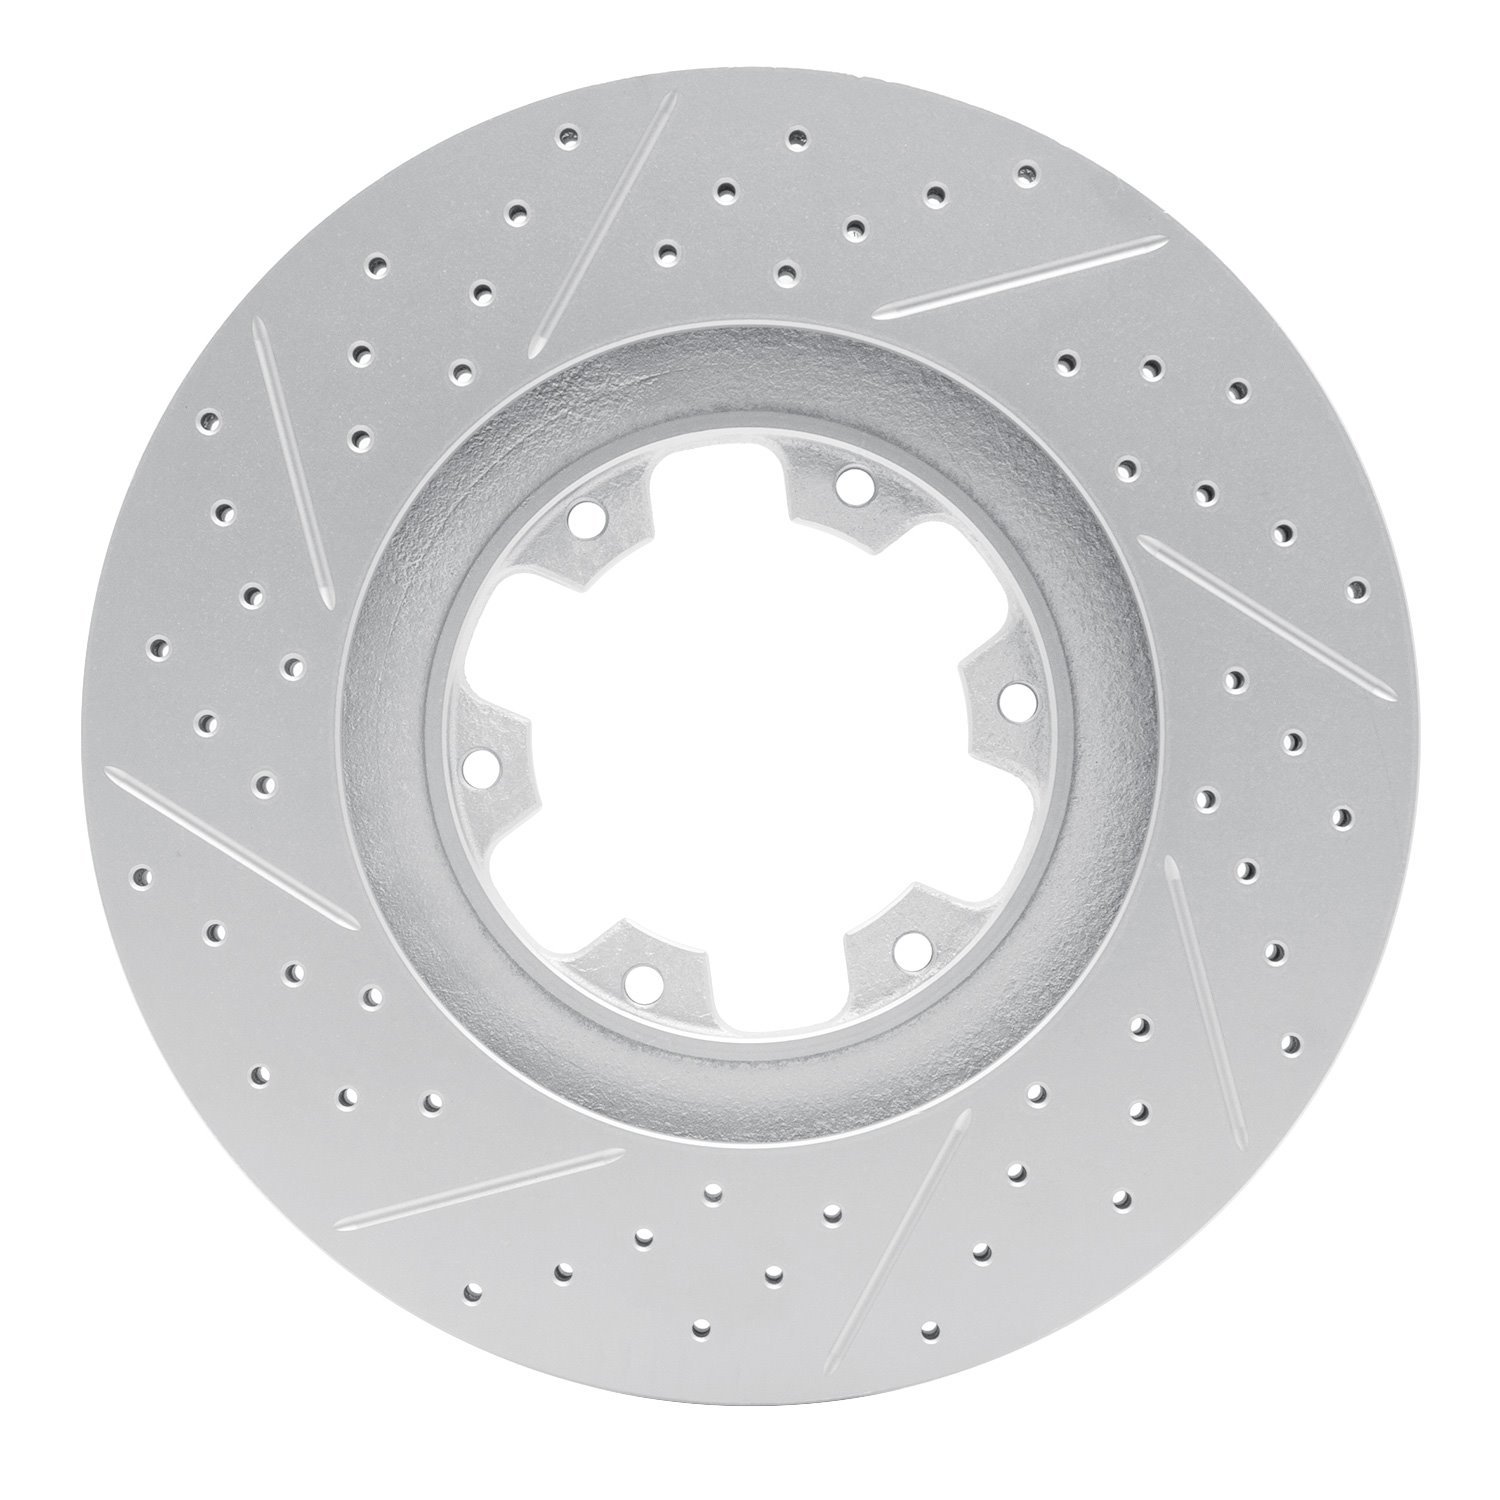 830-67086R Geoperformance Drilled/Slotted Brake Rotor, 1998-2004 Infiniti/Nissan, Position: Front Right